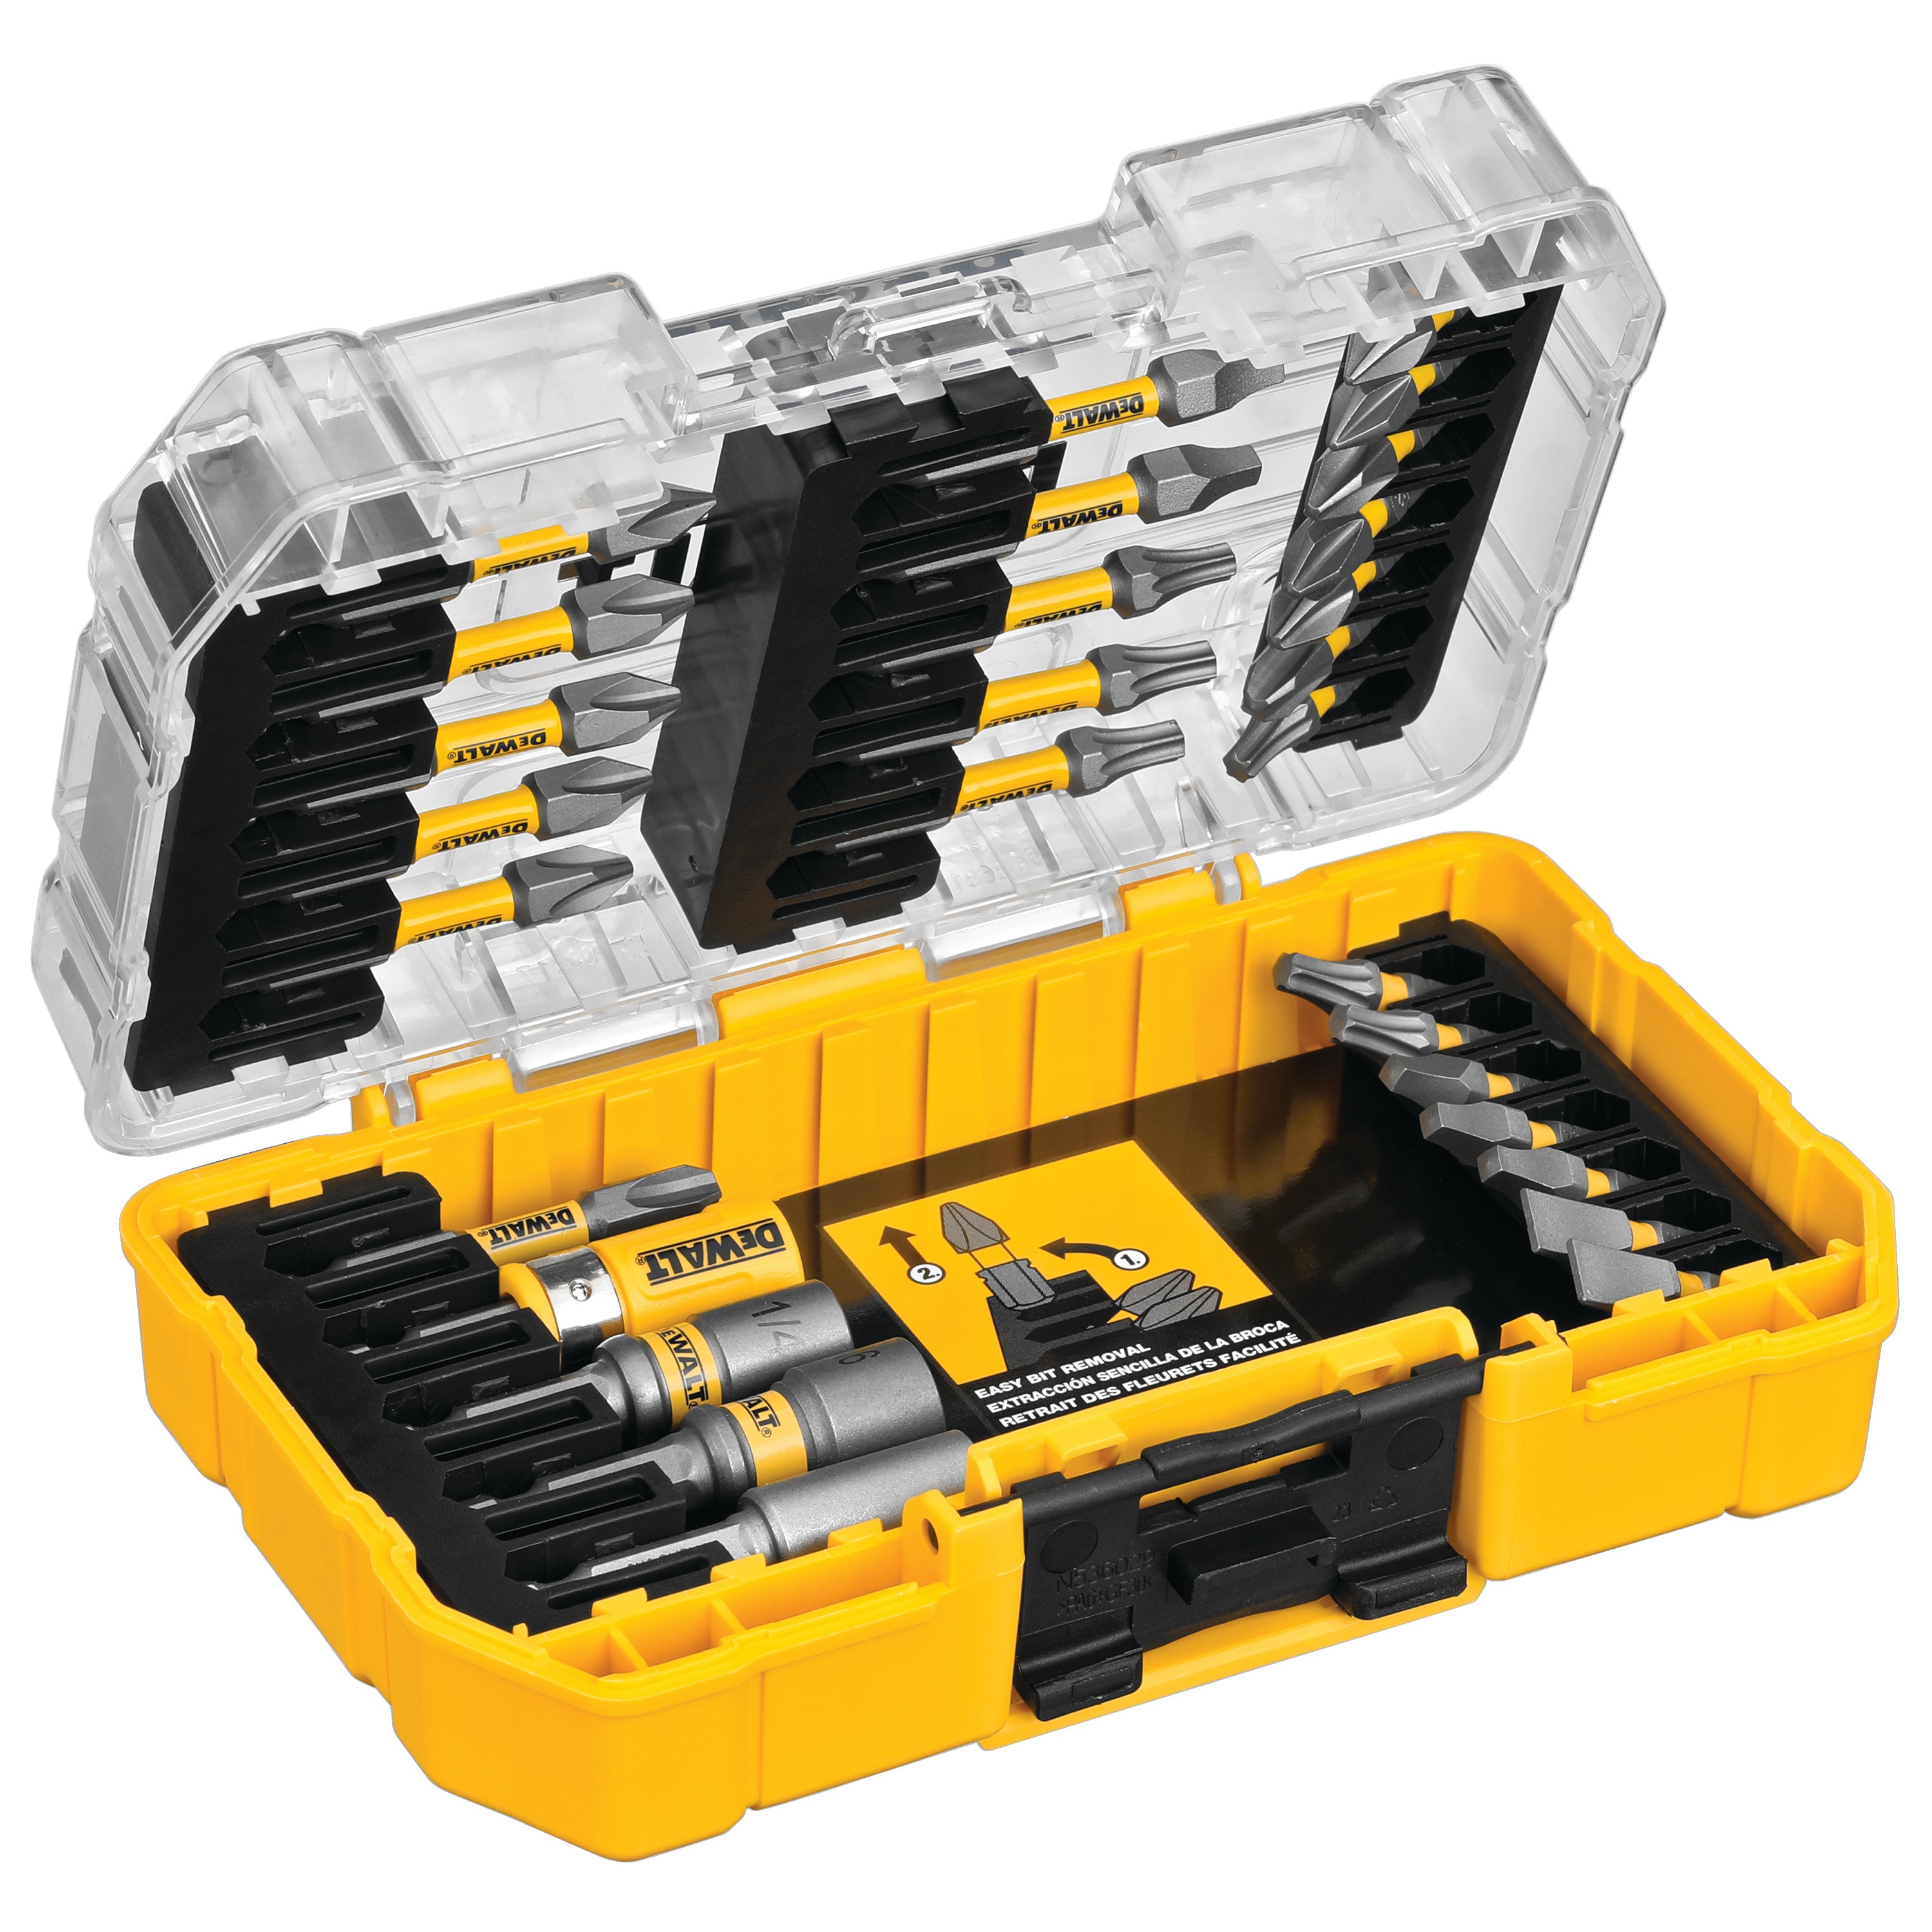 Profile of max fit screwdriving bit sets with open Tough Case system.